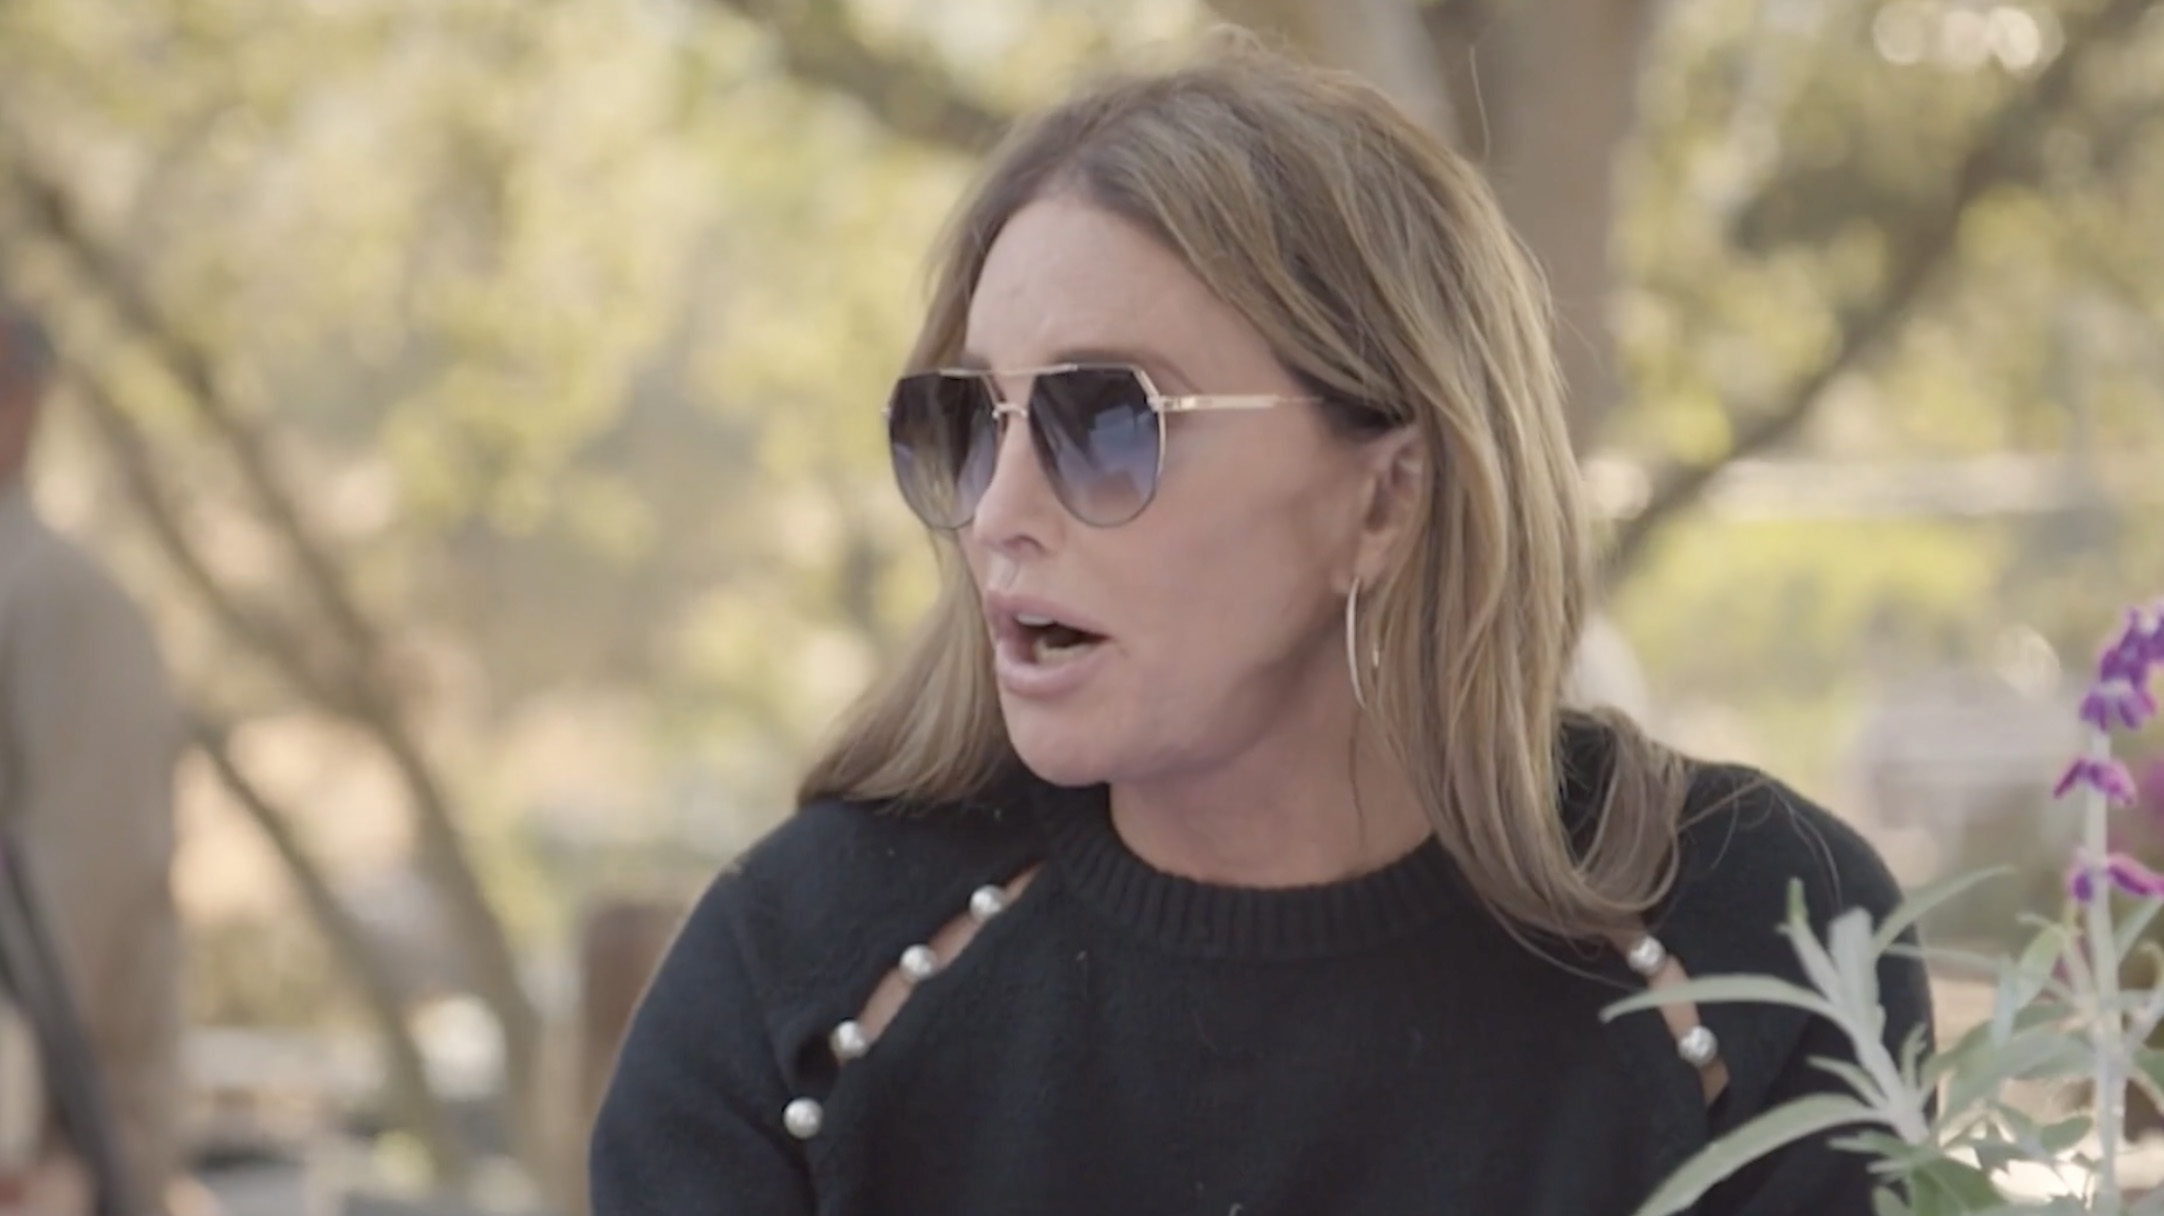 Caitlyn attended a garden party at the Jenner's Malibu home - as seen here in a teaser episode